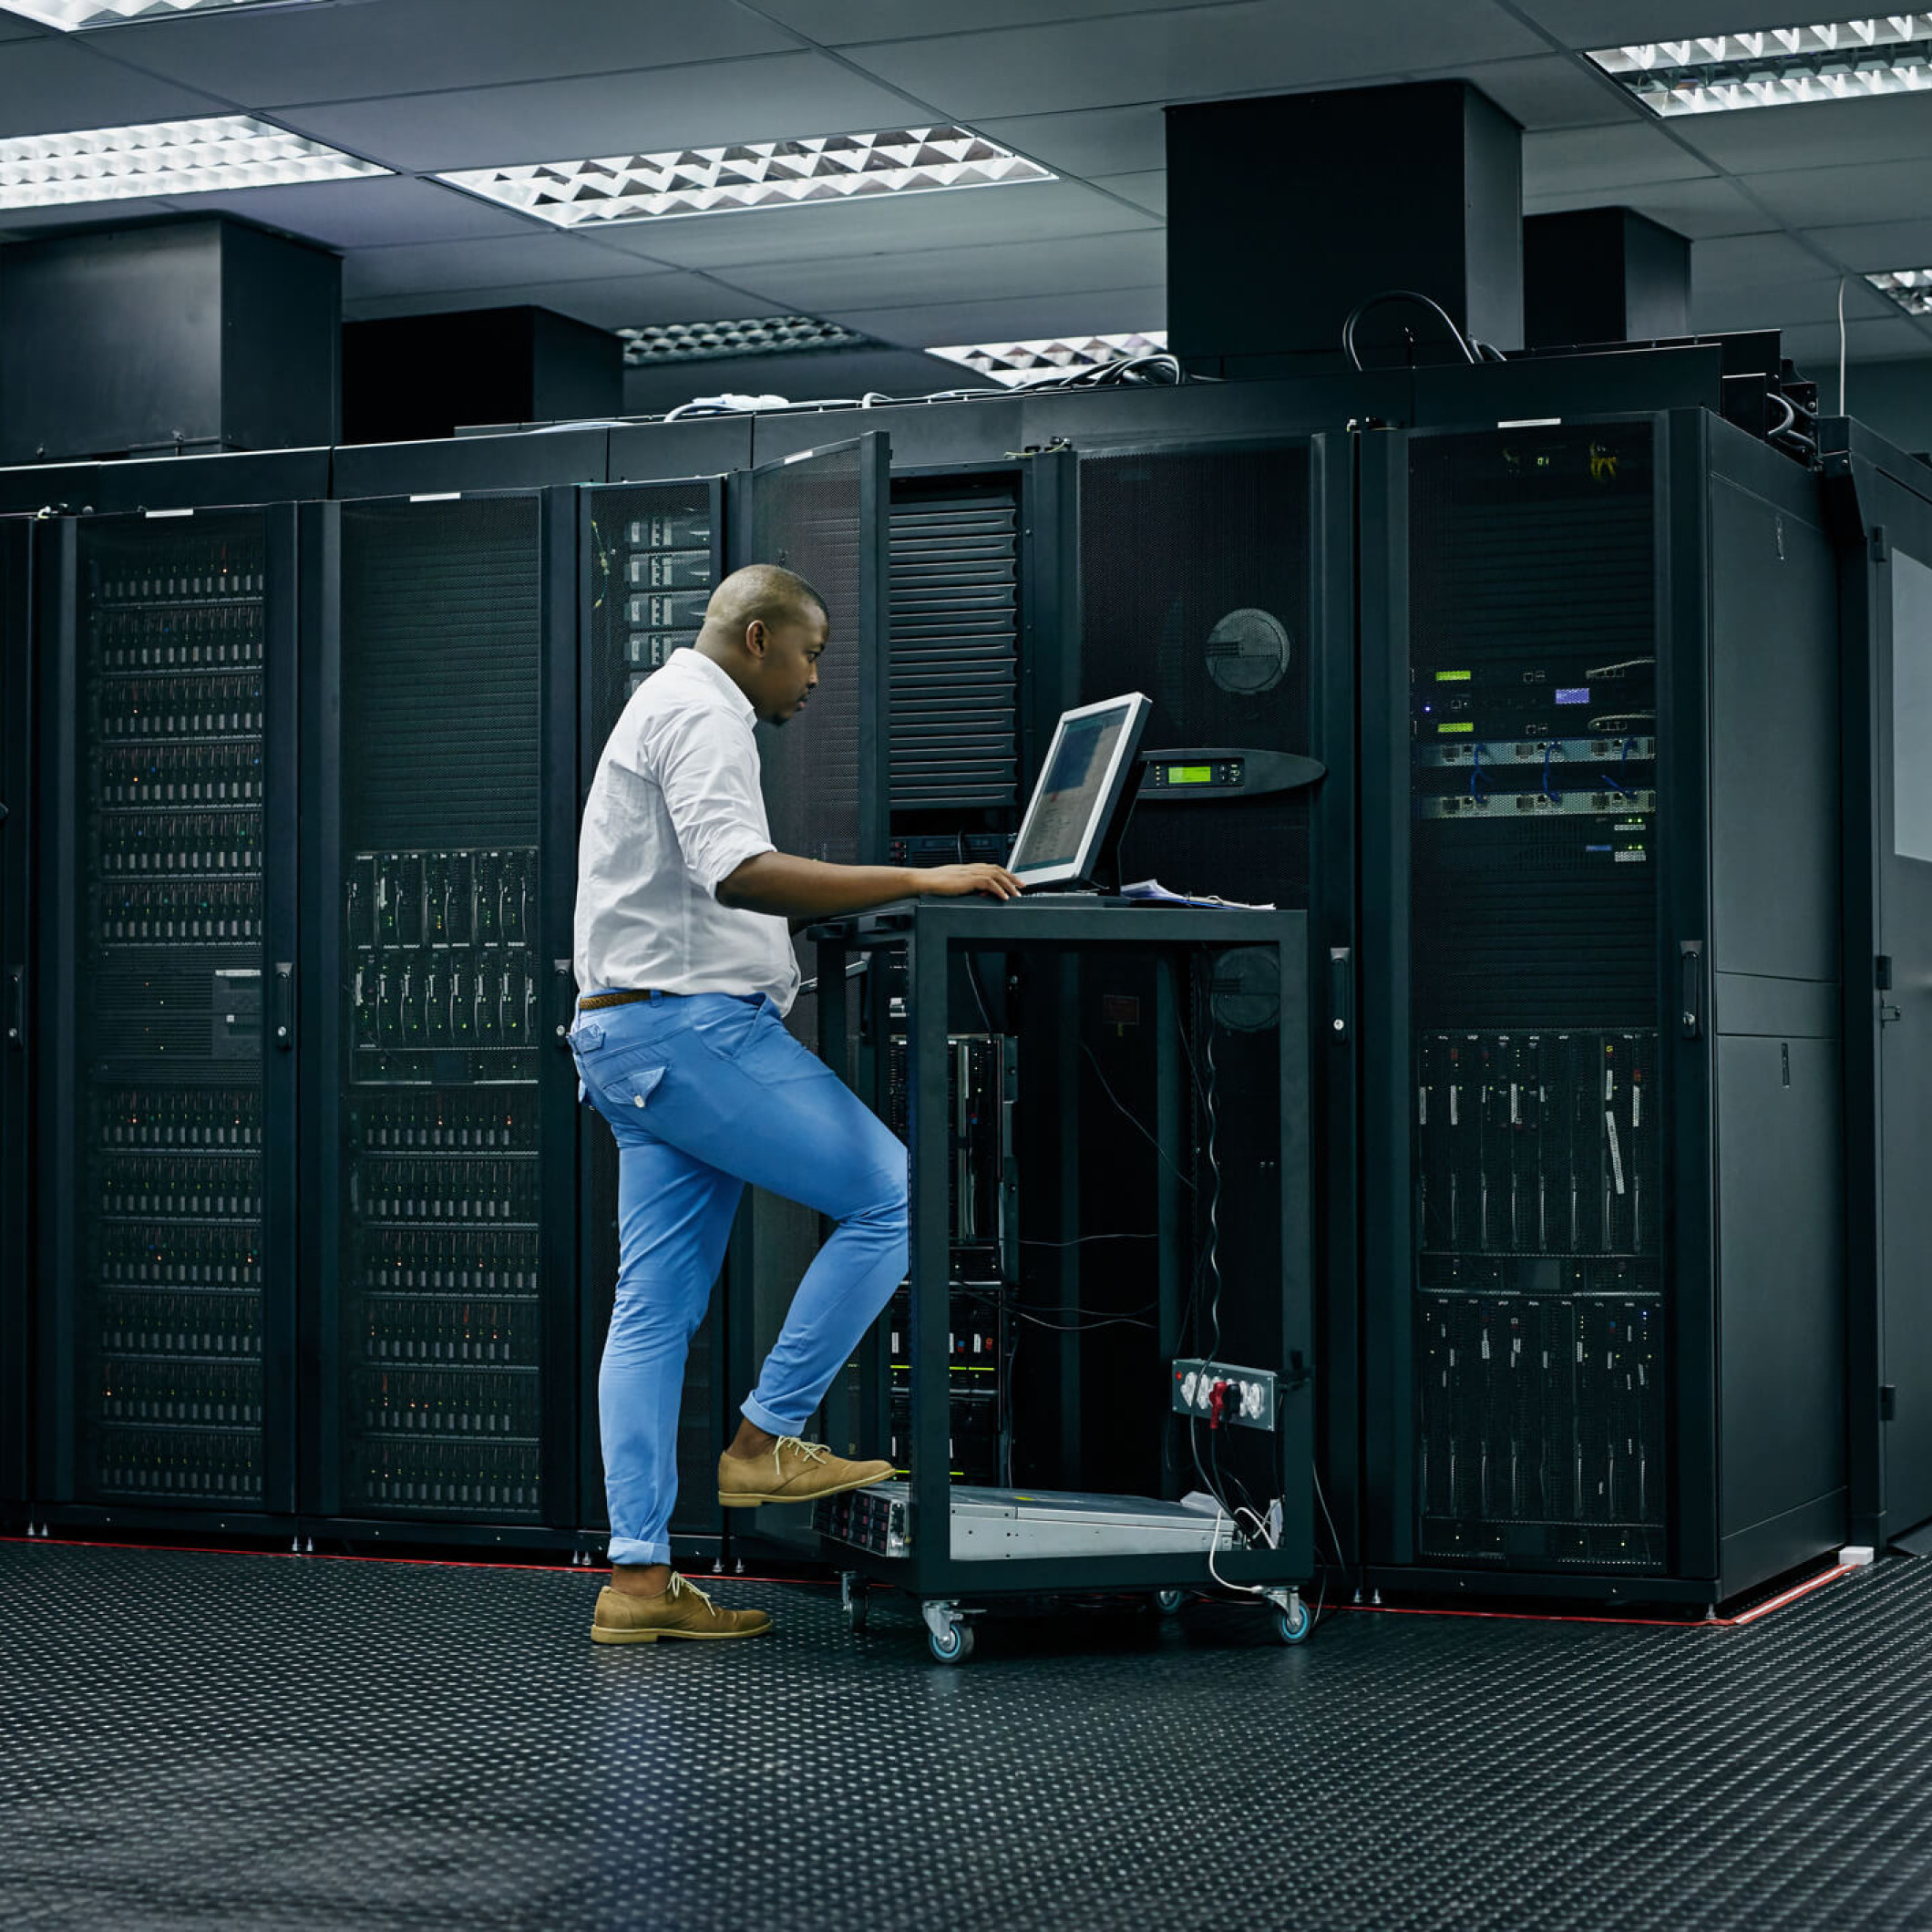 A man standing working on a computer in front of a server